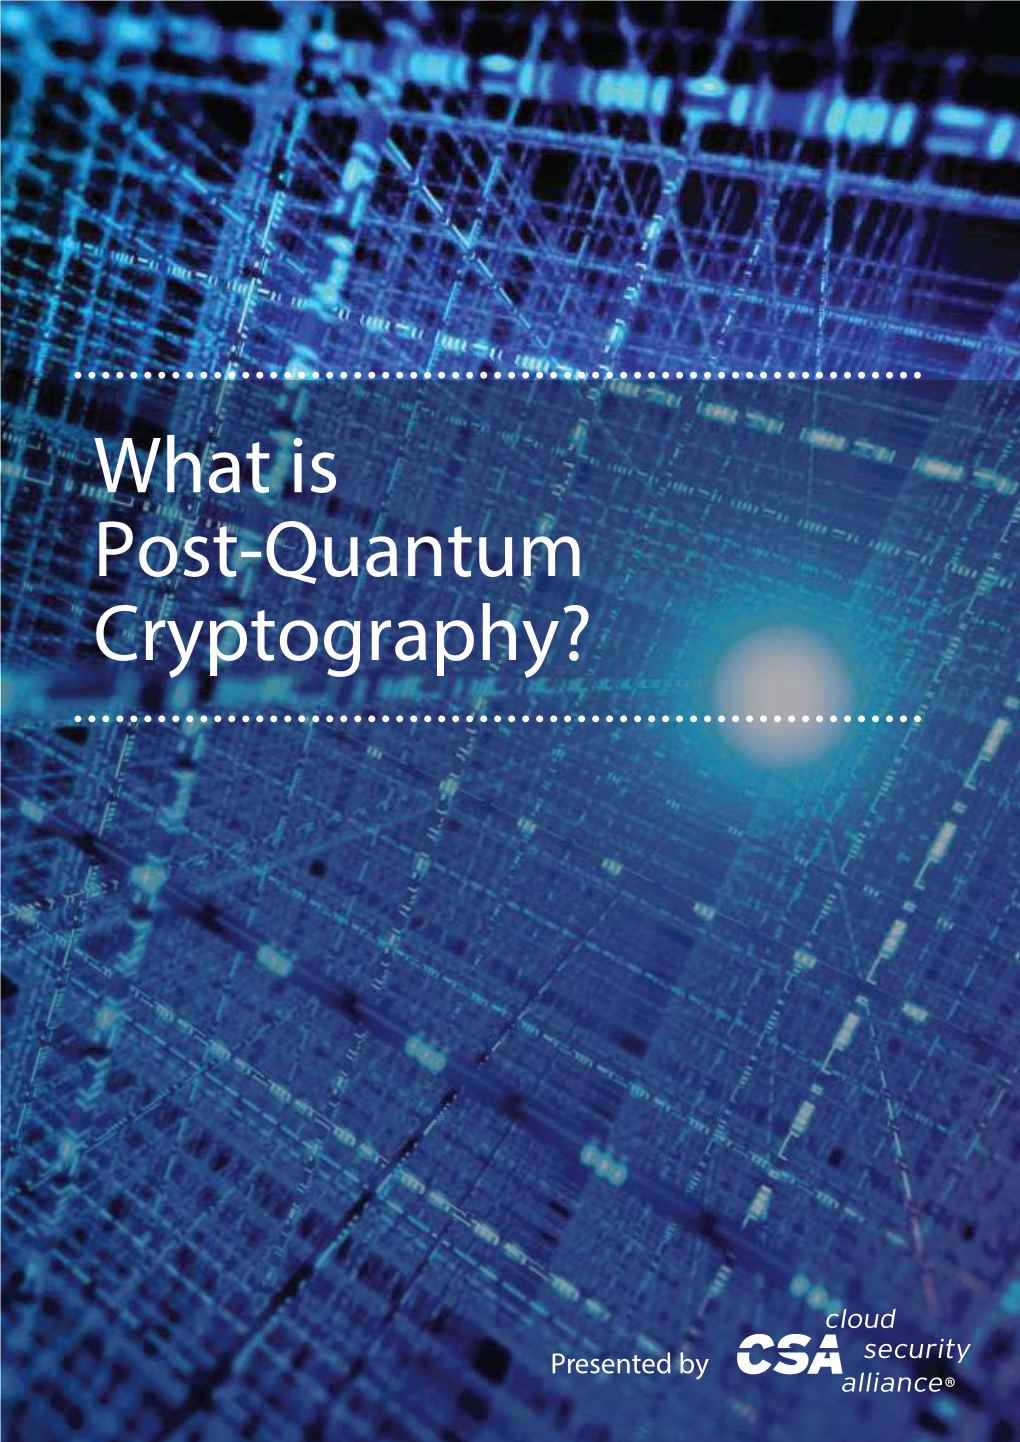 What Is Post-Quantum Cryptography?